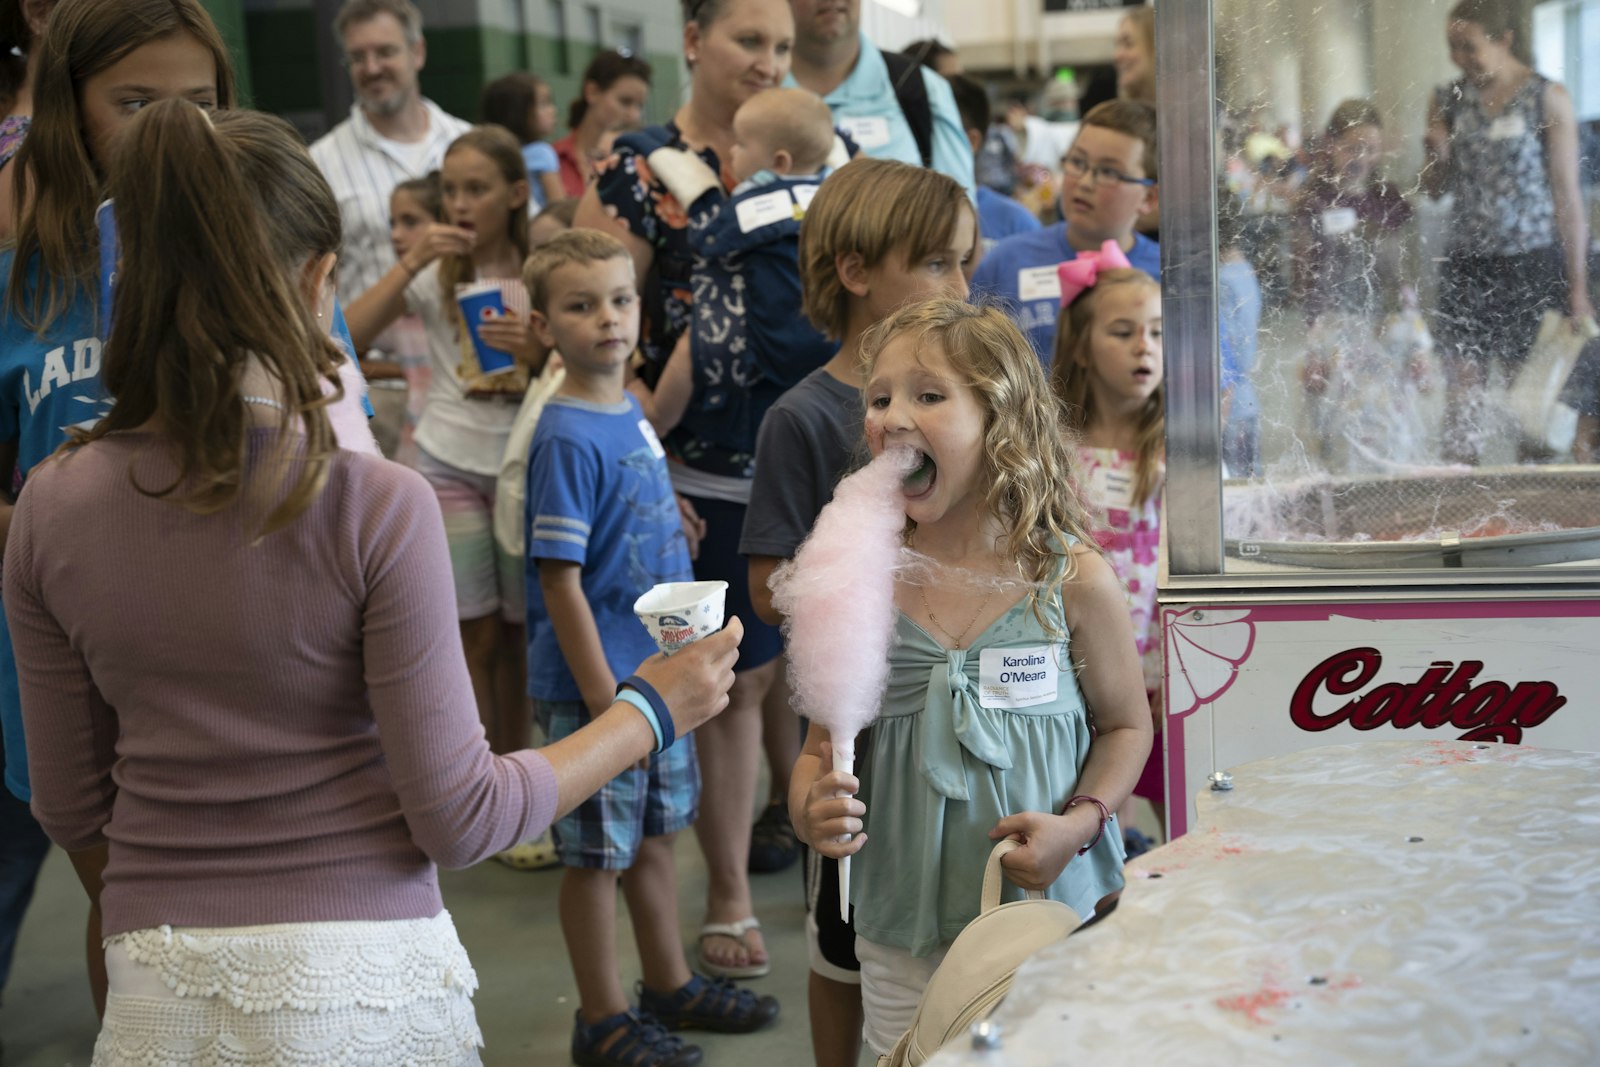 A young girl enjoys cotton candy, one of several attractions for children and families during the 25th anniversary celebration. One sister called the event a "family reunion."